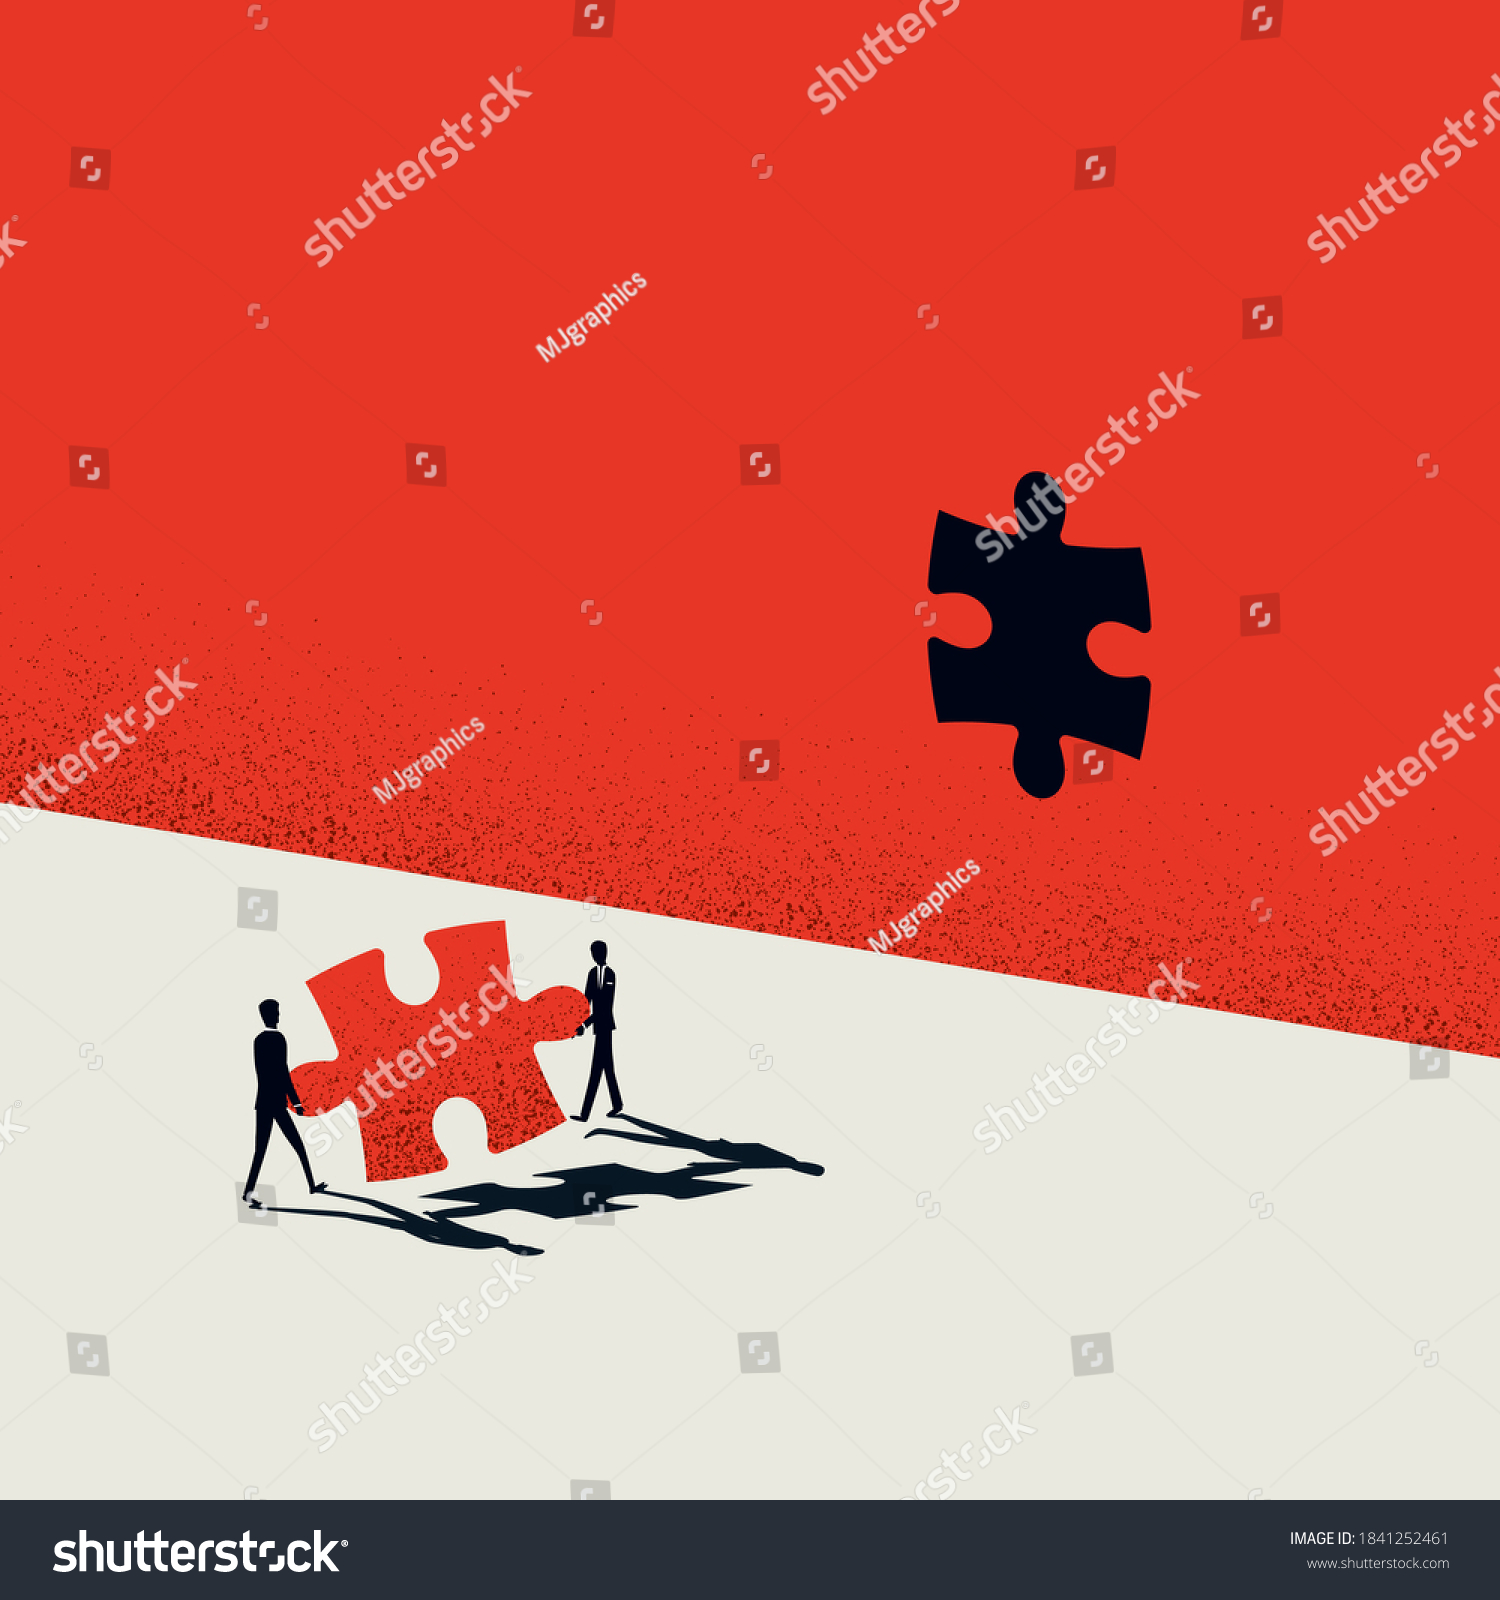 stock-vector-creative-teamwork-in-business-vector-concept-creativity-team-cooperation-jigsaw-puzzle-symbol-1841252461